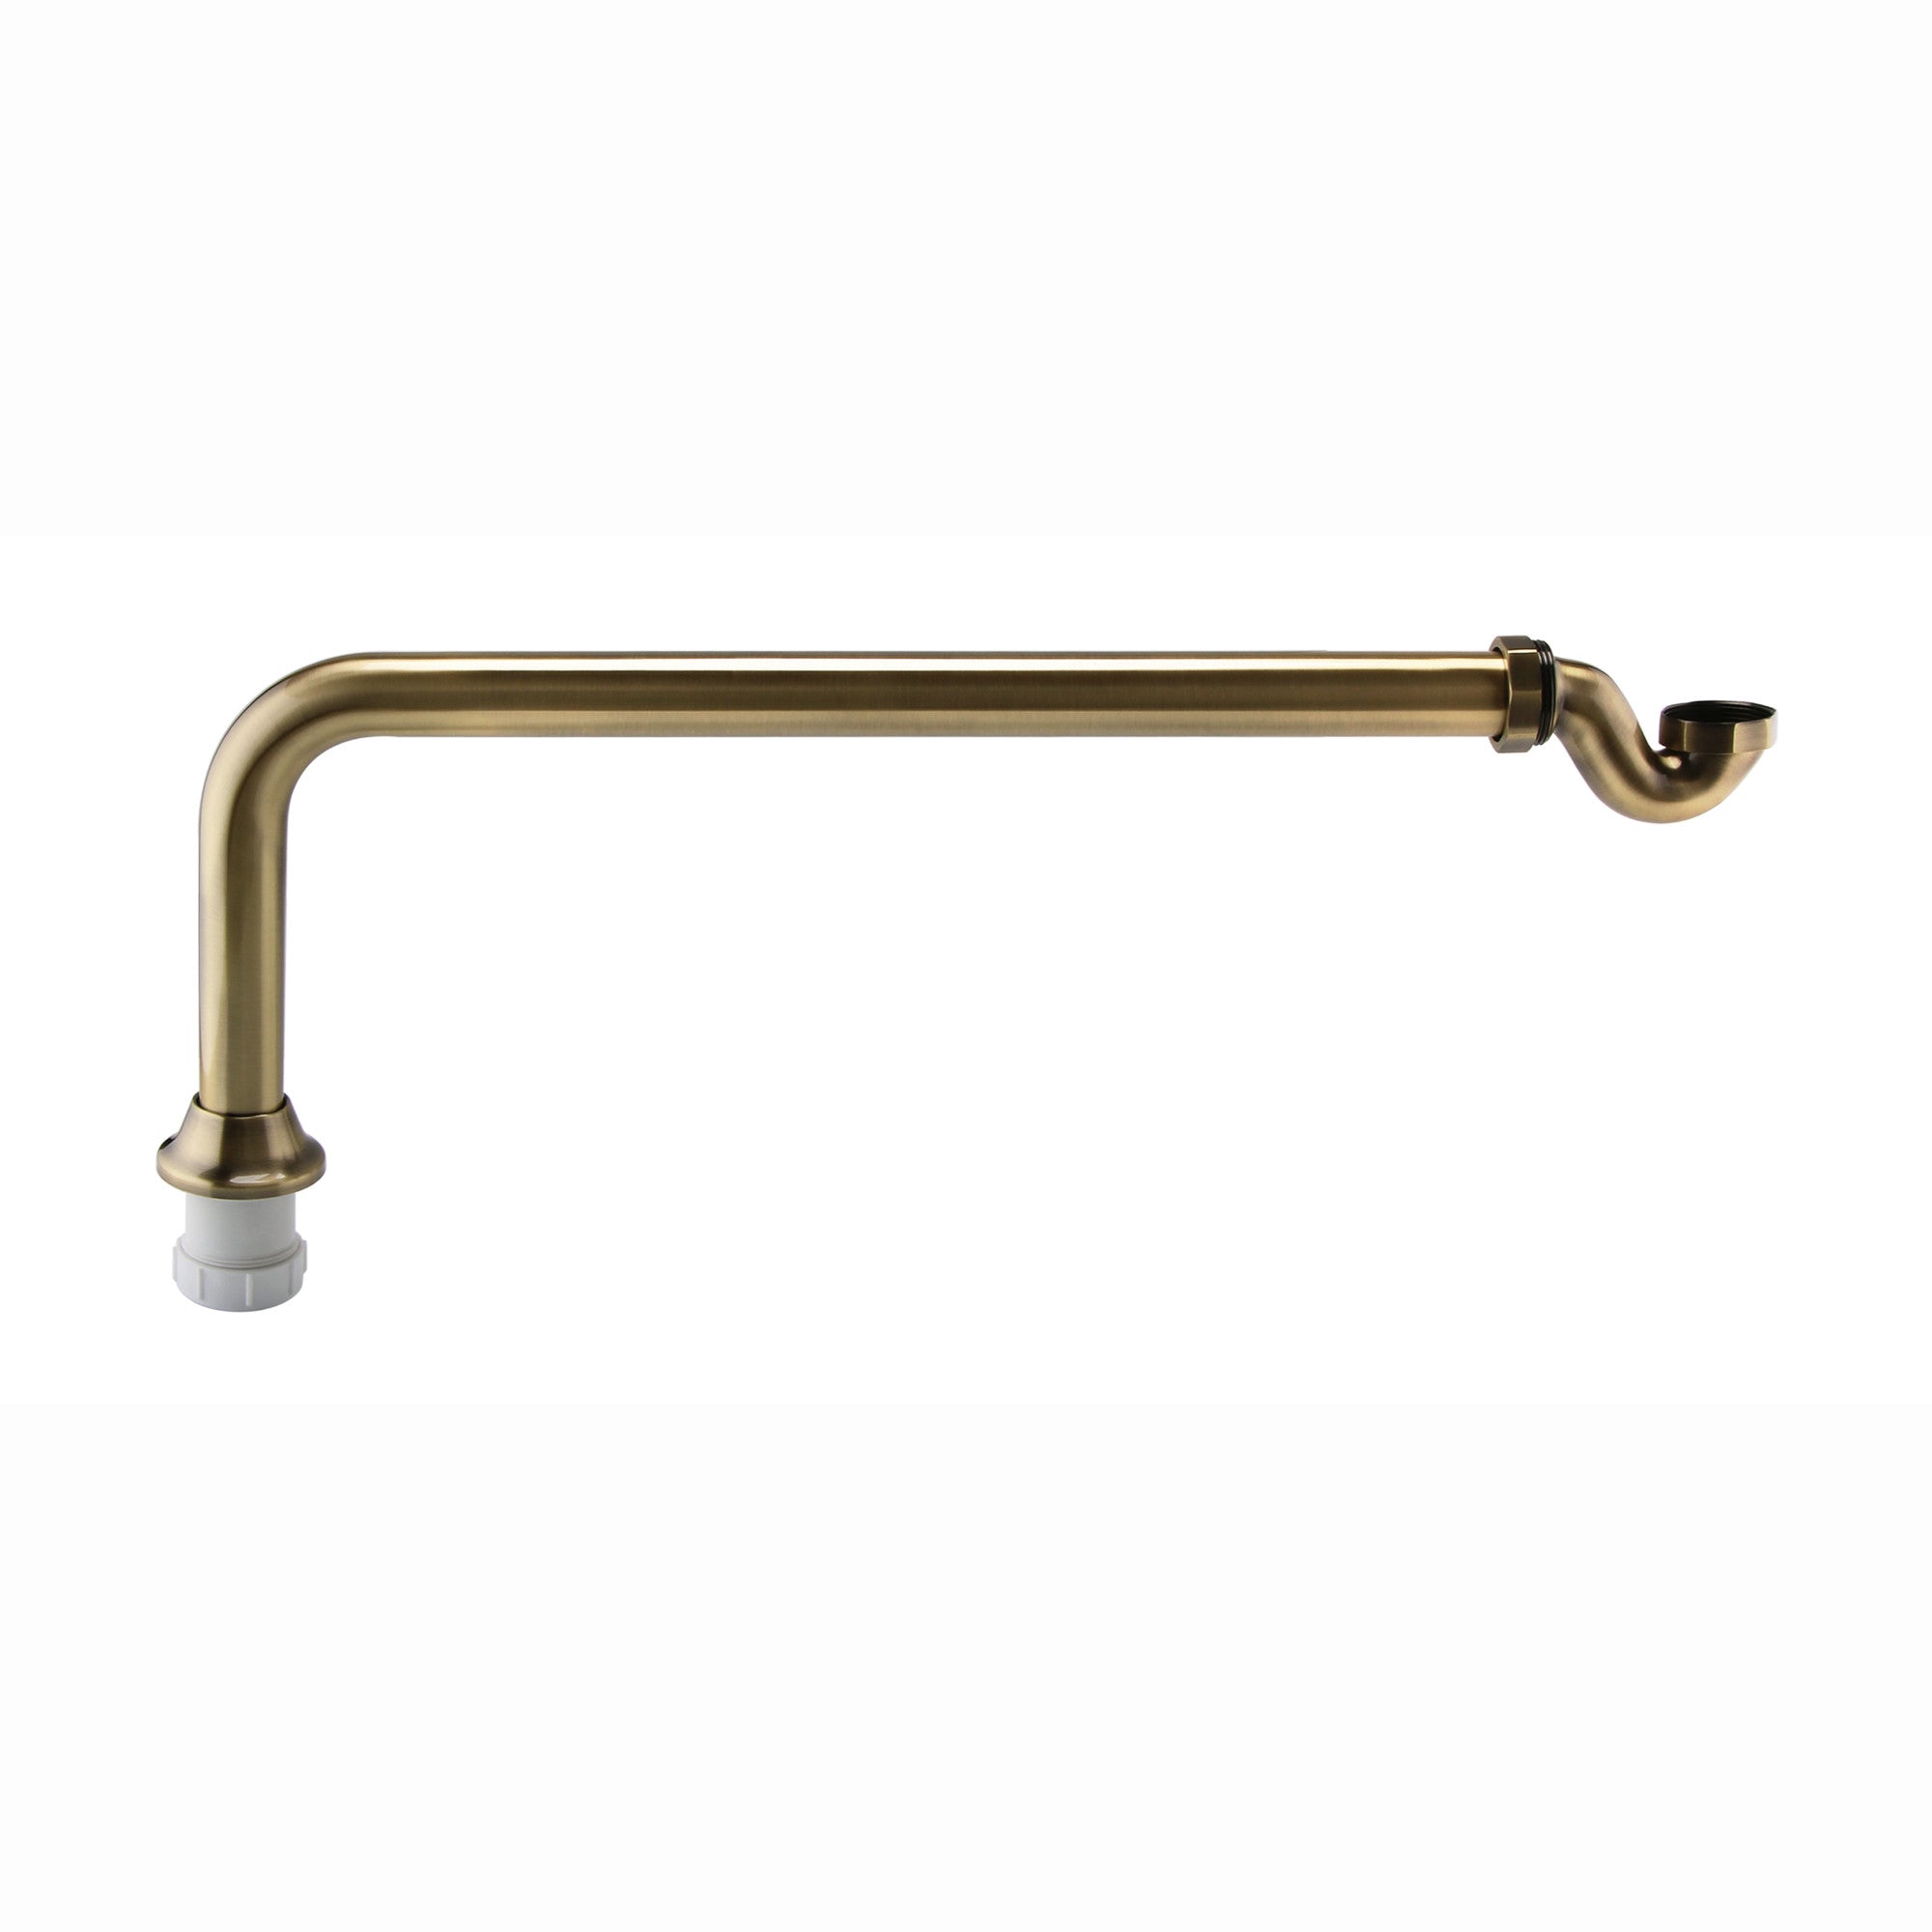 Traditional exposed shallow seal bath trap & pipe - antique brass